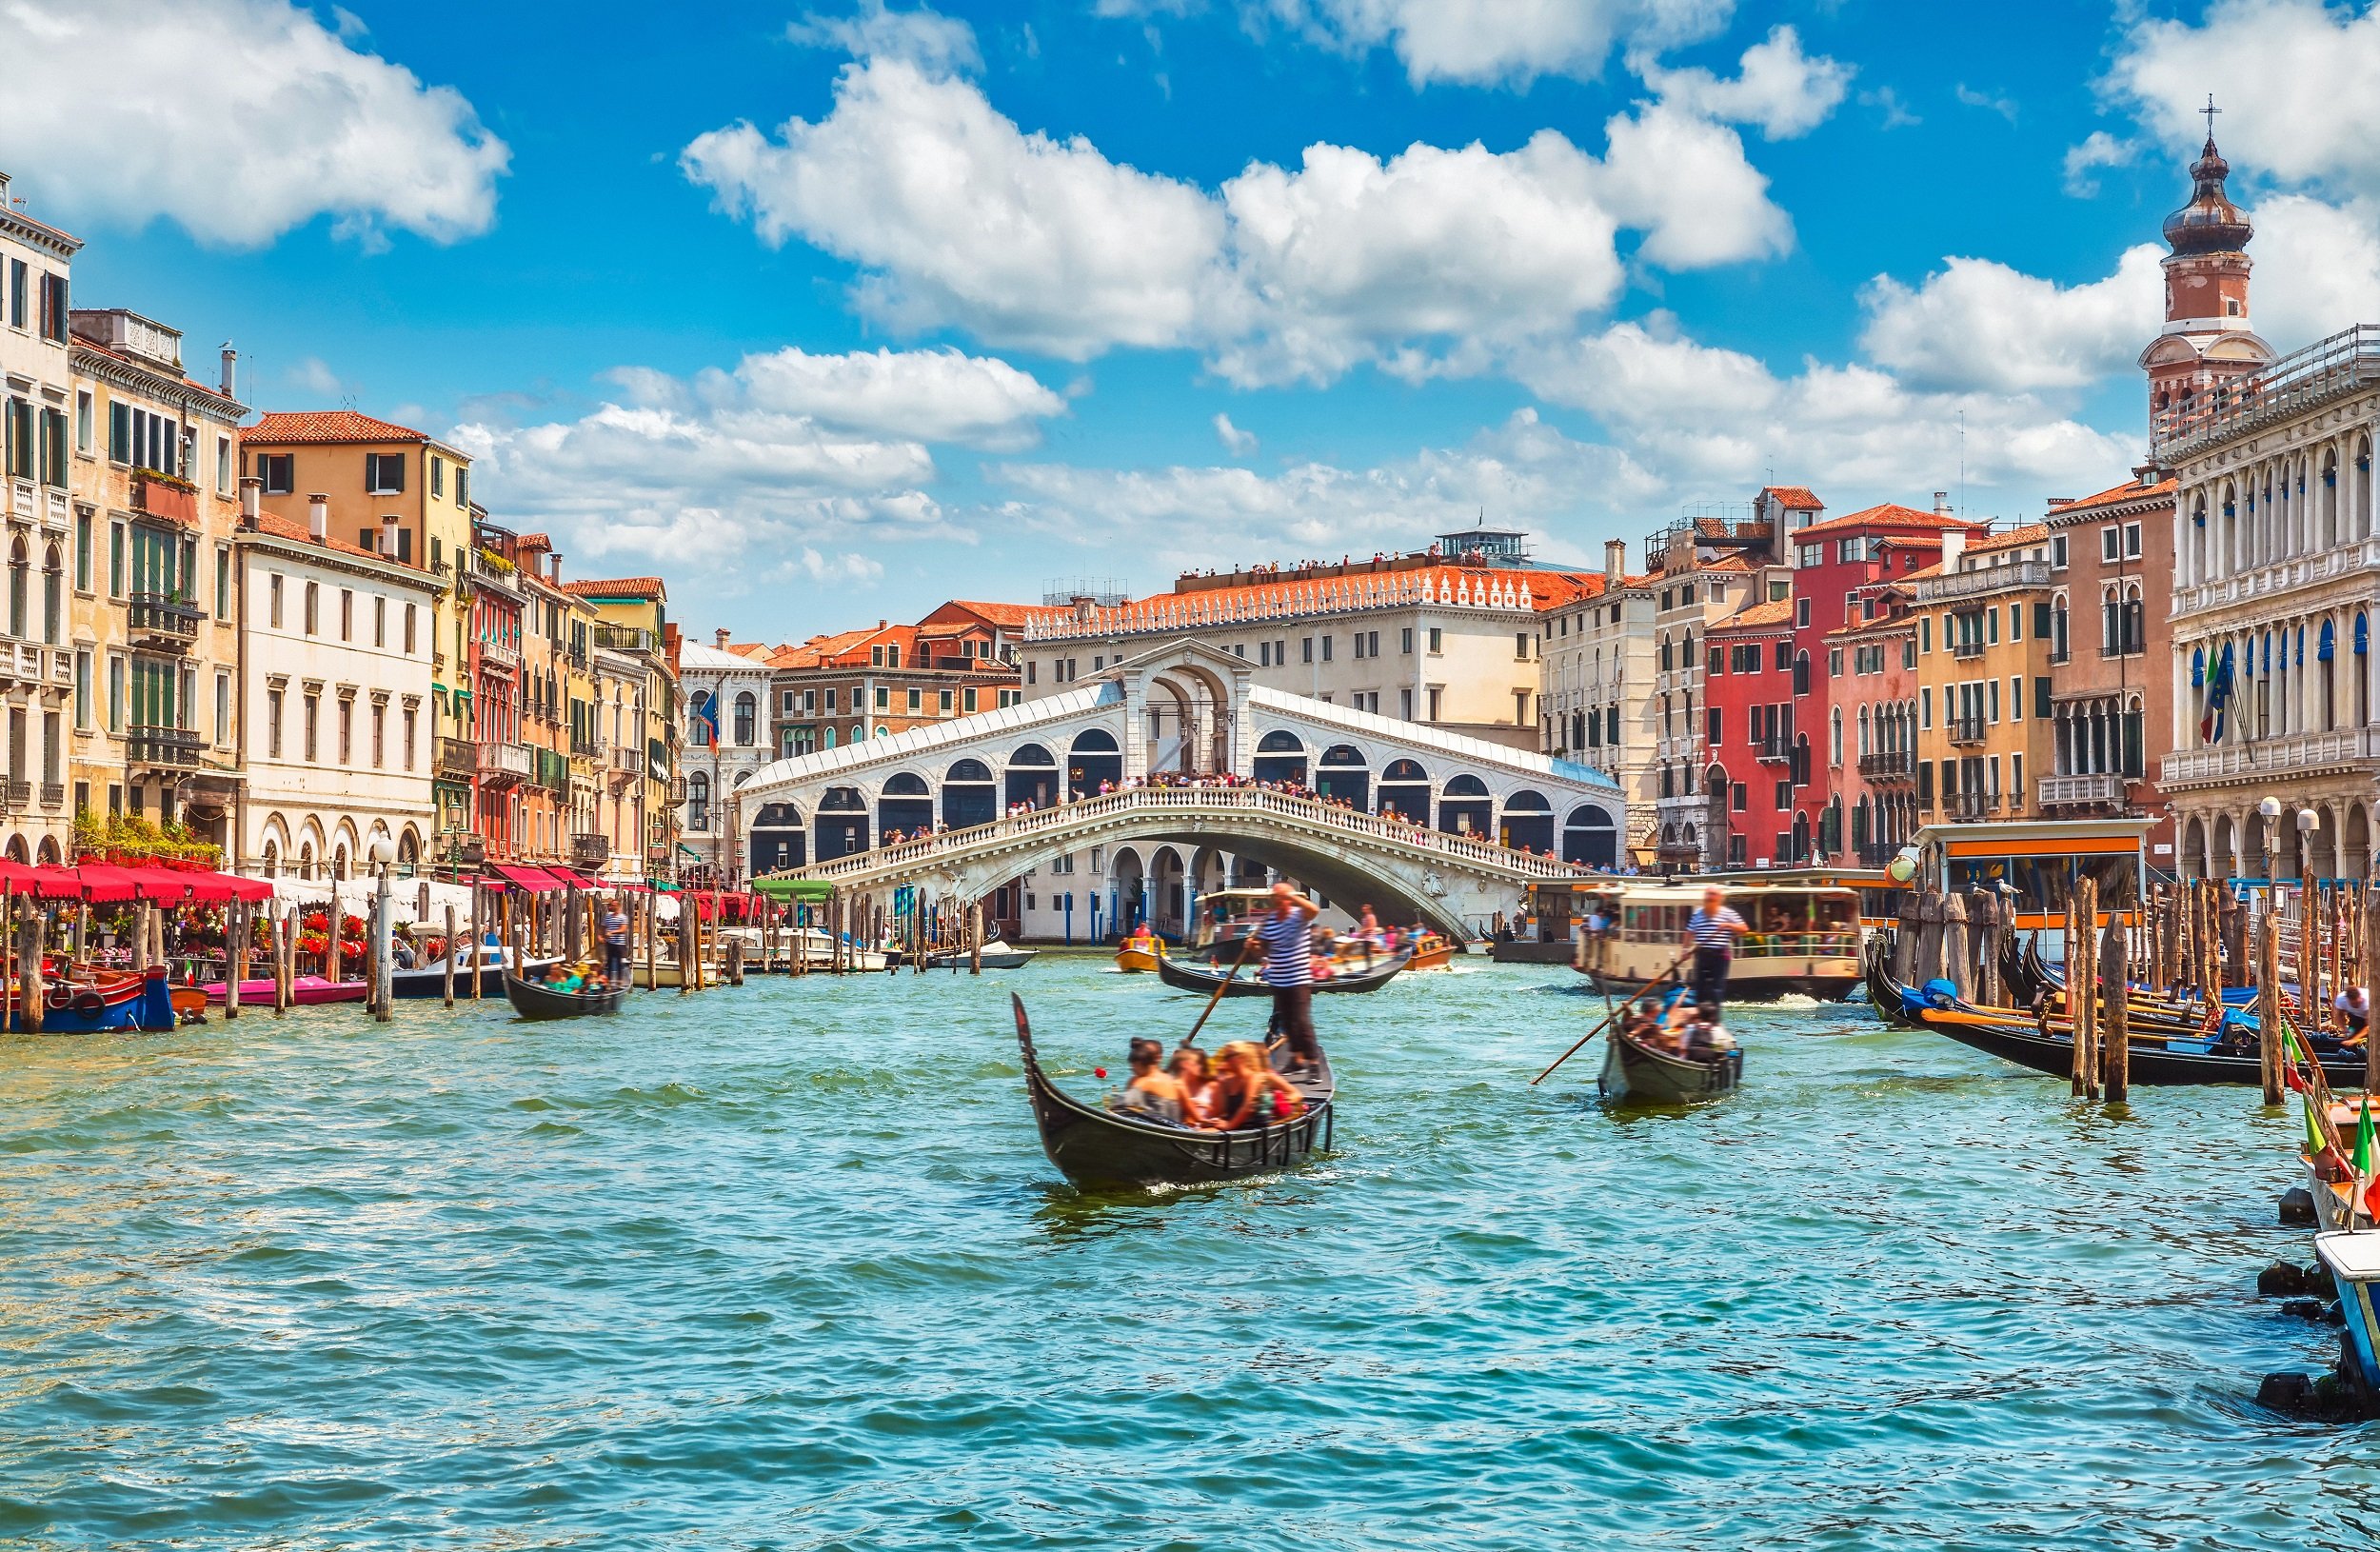 Visit Beautiful Venice On Our Italy Food & Wine Journey - 13 Day Tour Package